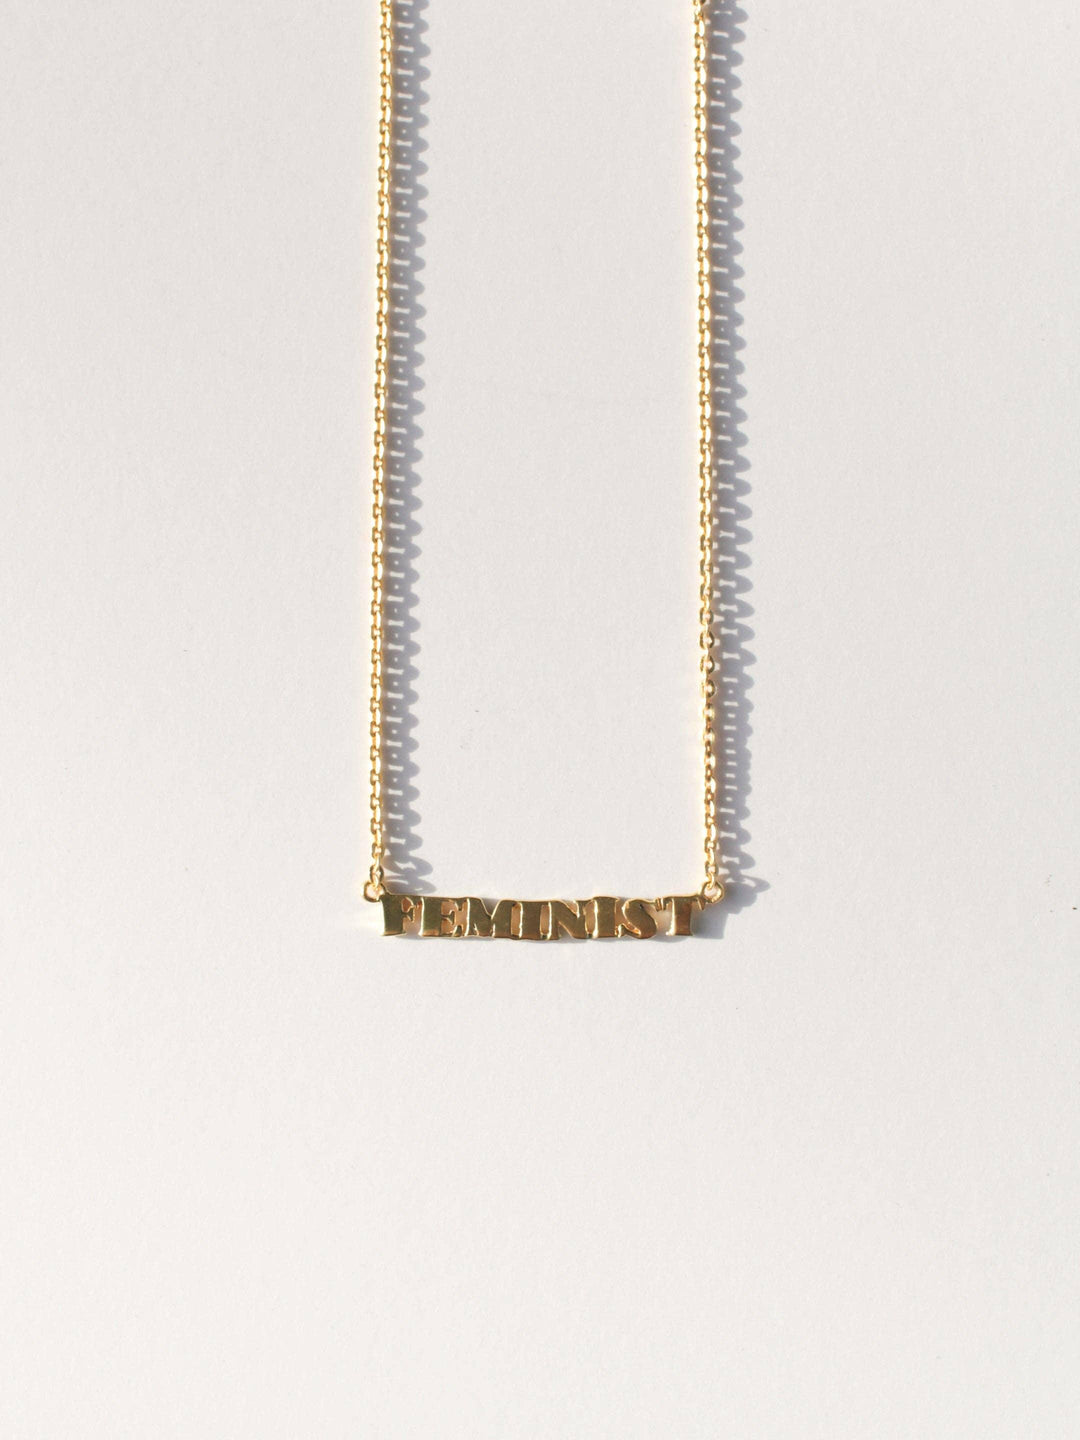 FEMINIST Necklace - Ethical Trade Co